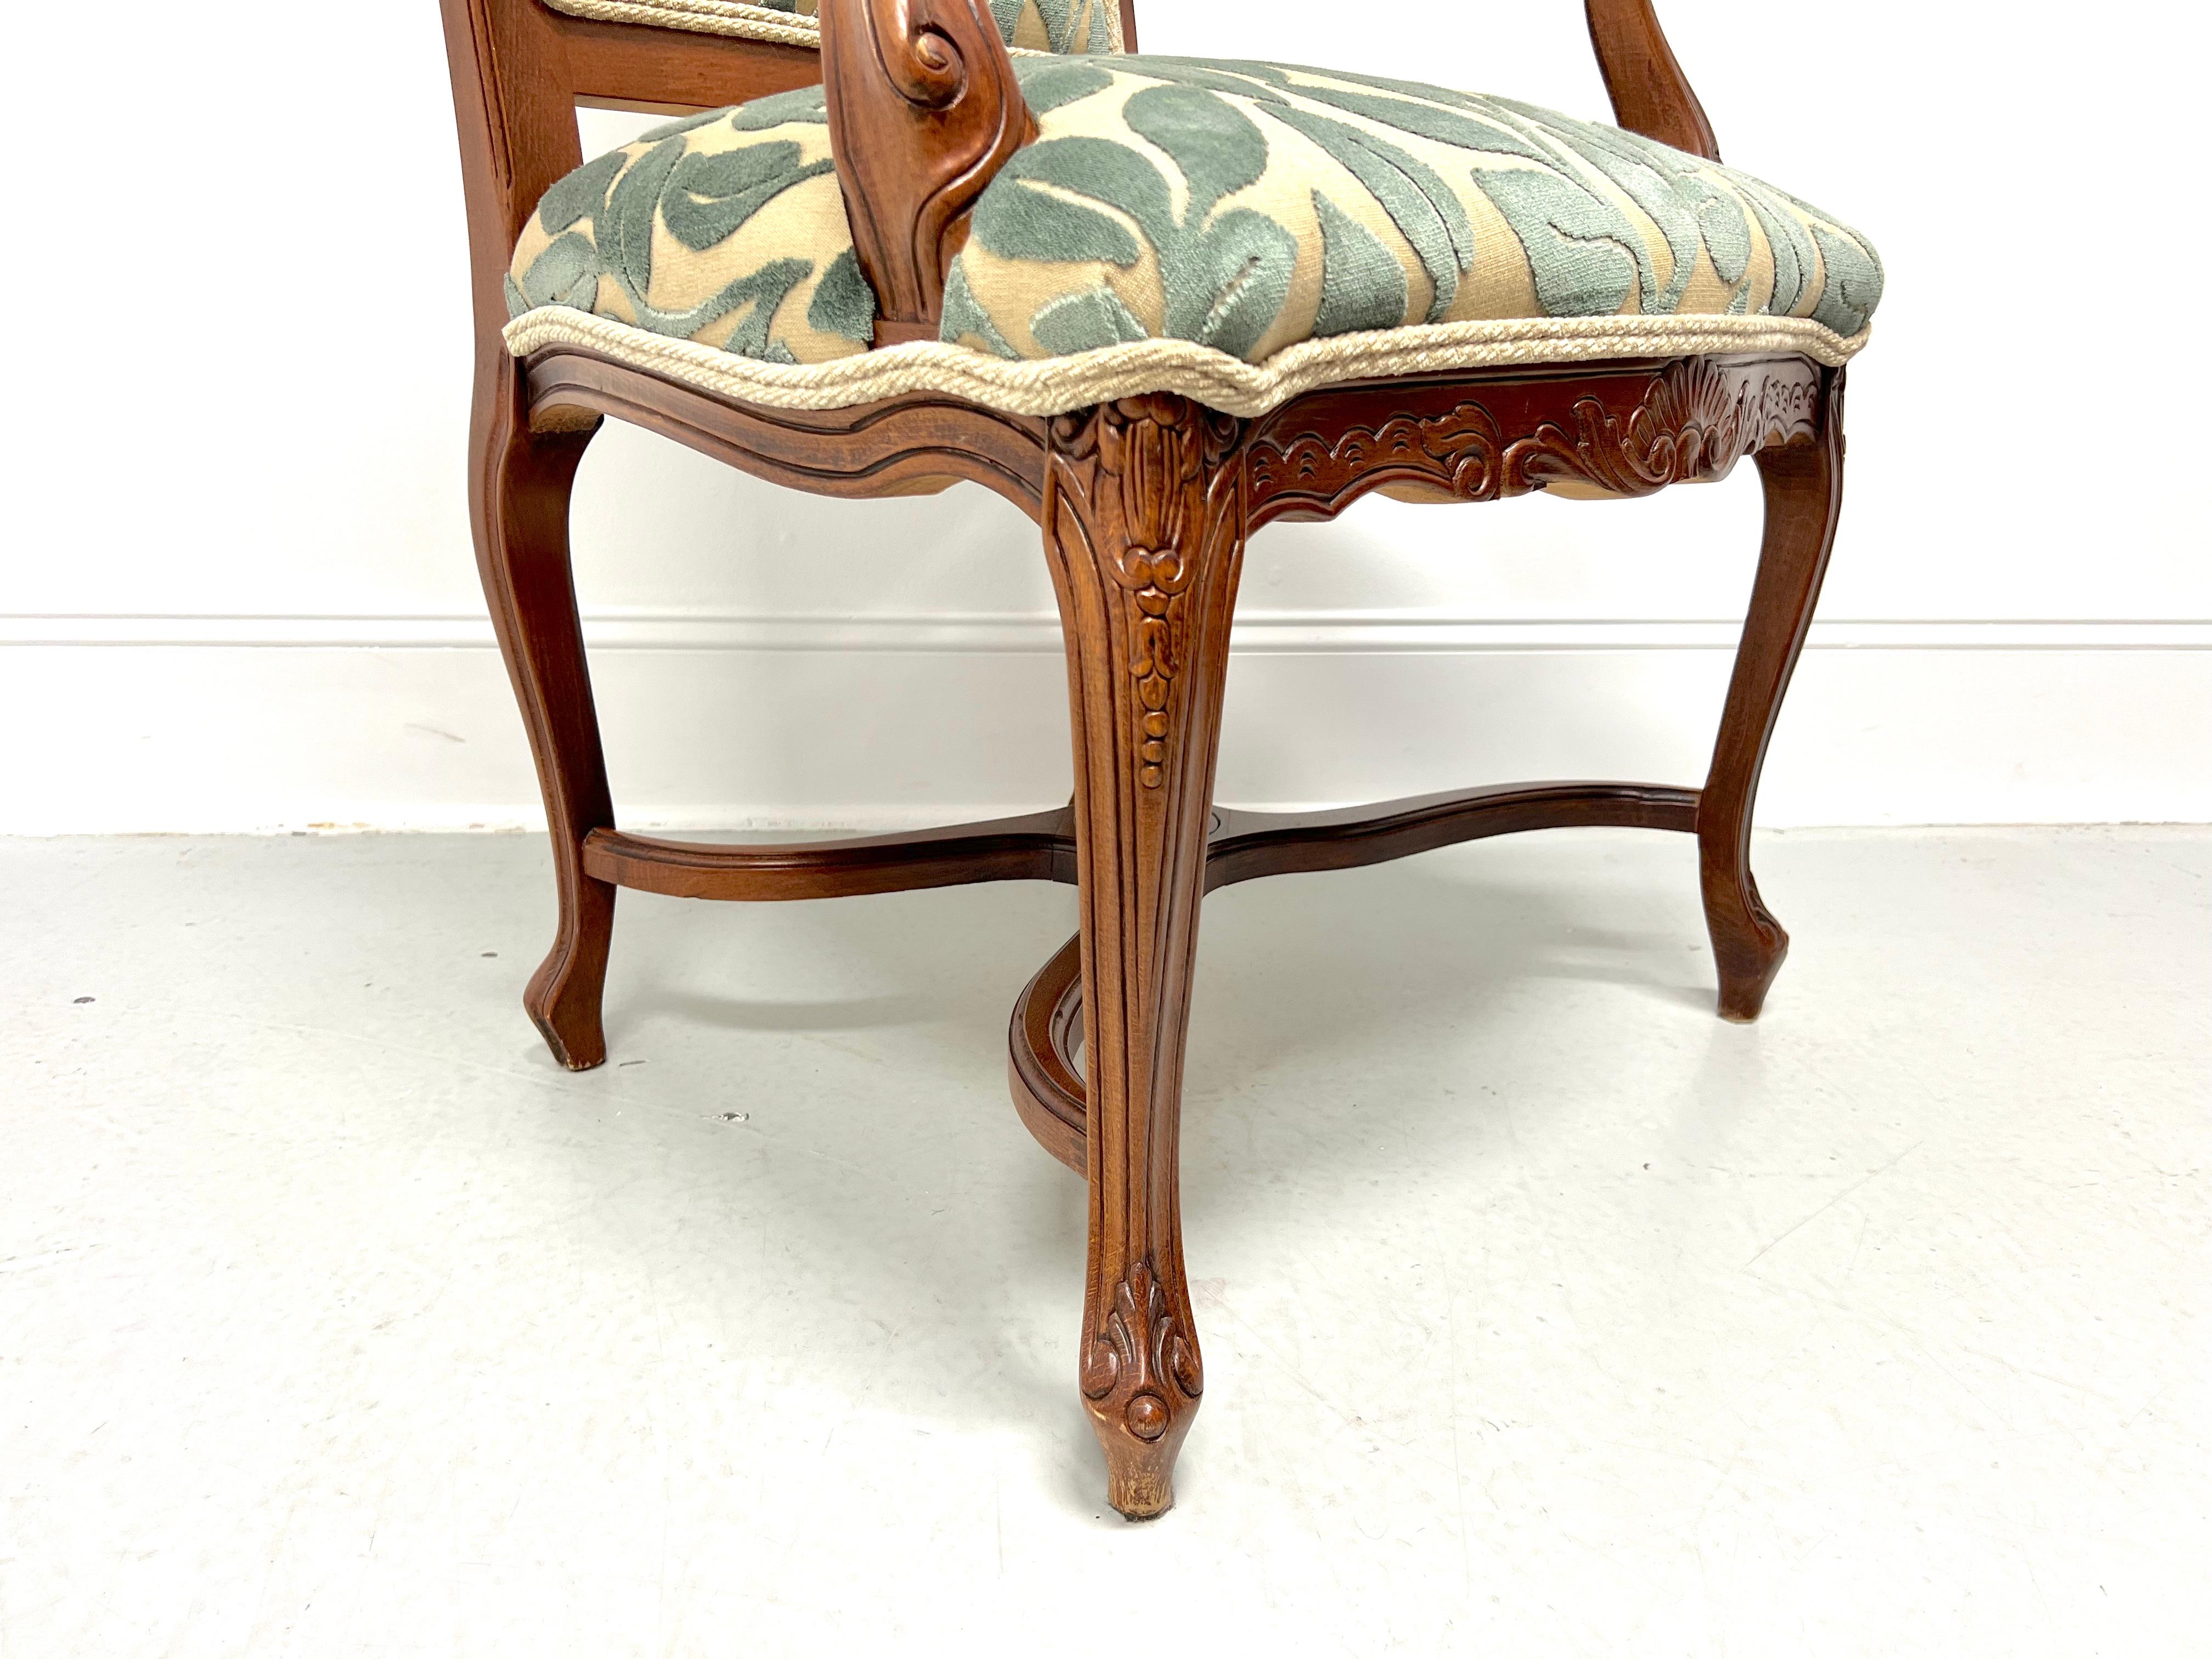 20th Century French Country Louis XV Walnut Fauteuils Open-Arm Armchairs - Pair For Sale 4